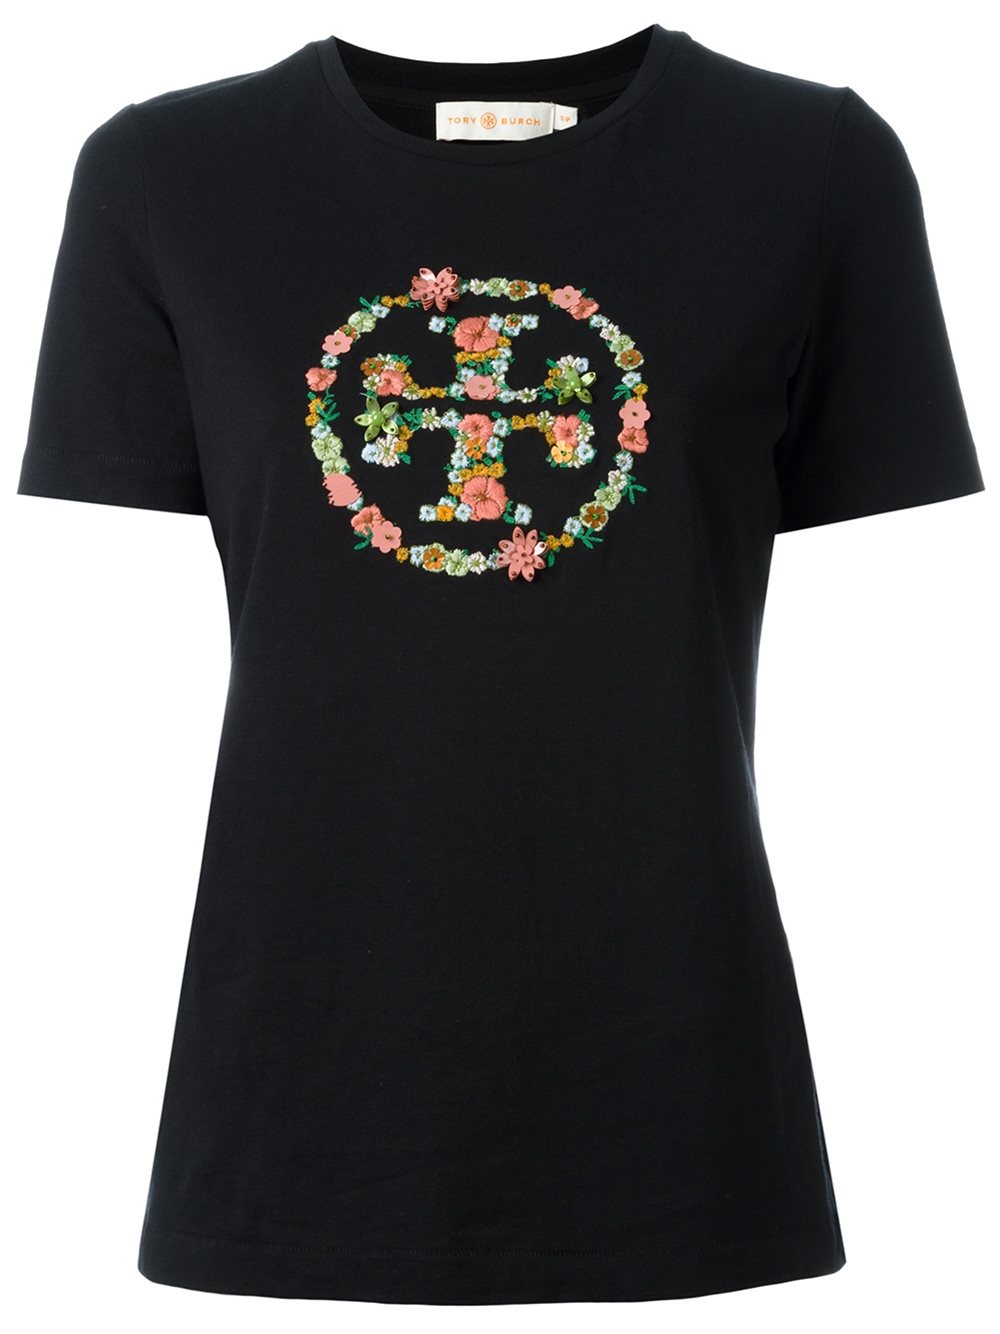 Tory burch Embroidered Logo T-shirt in Black | Lyst